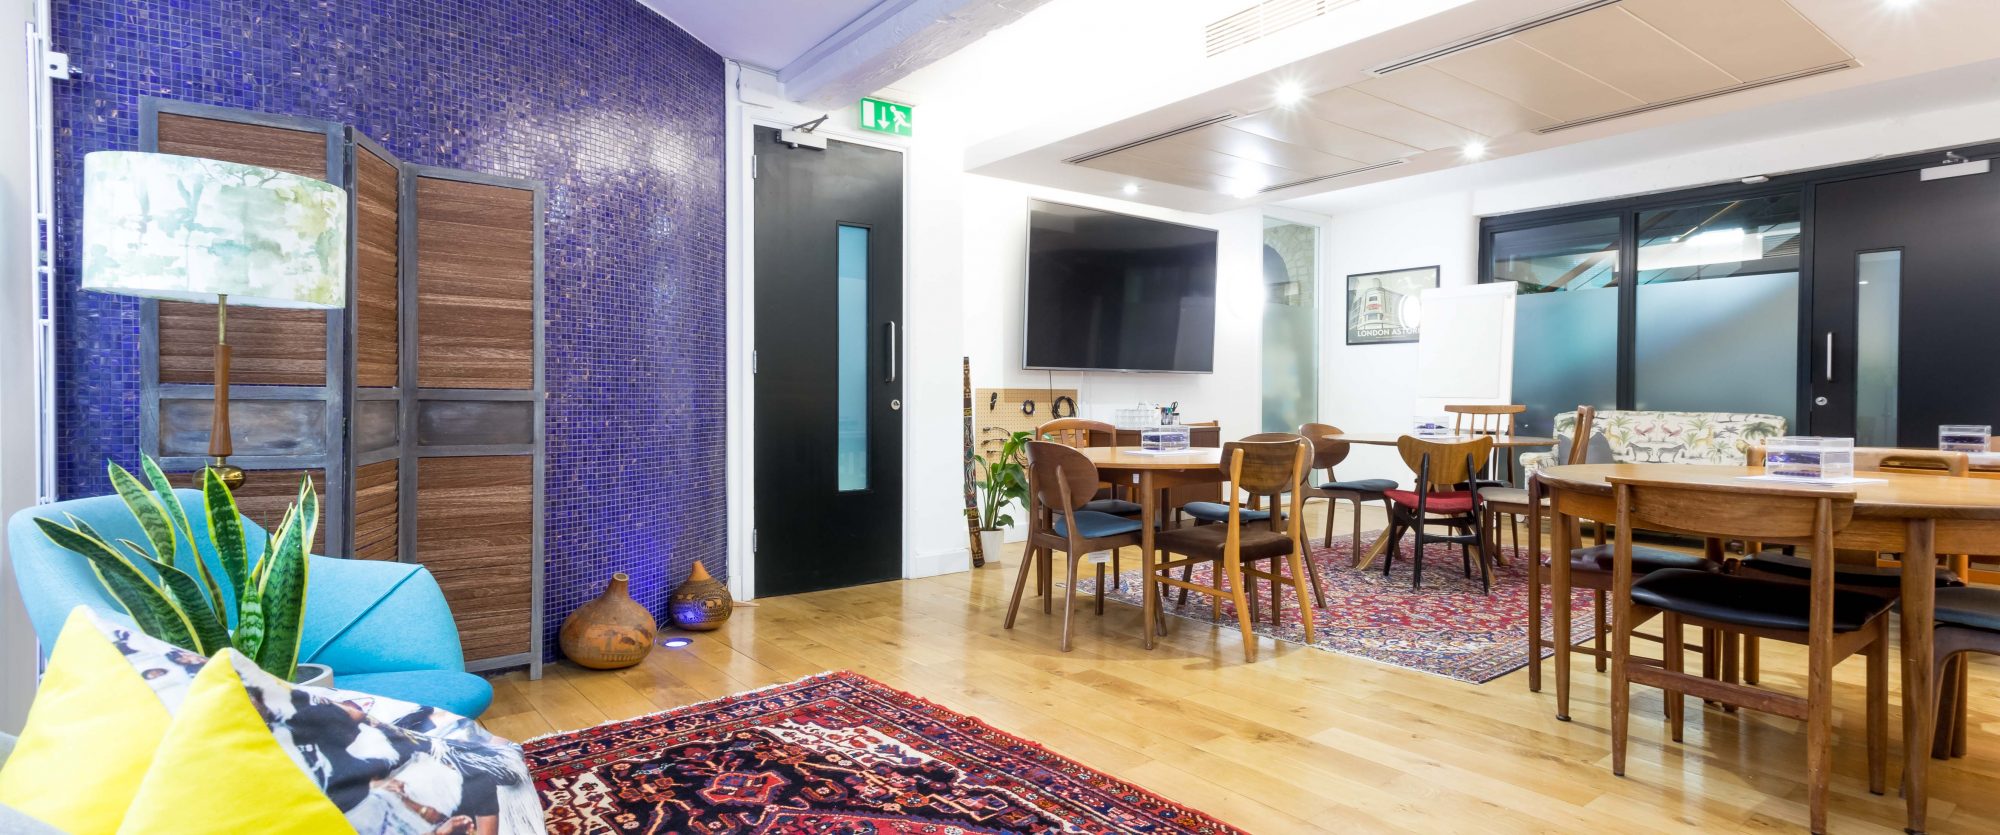 creative room for hire in london